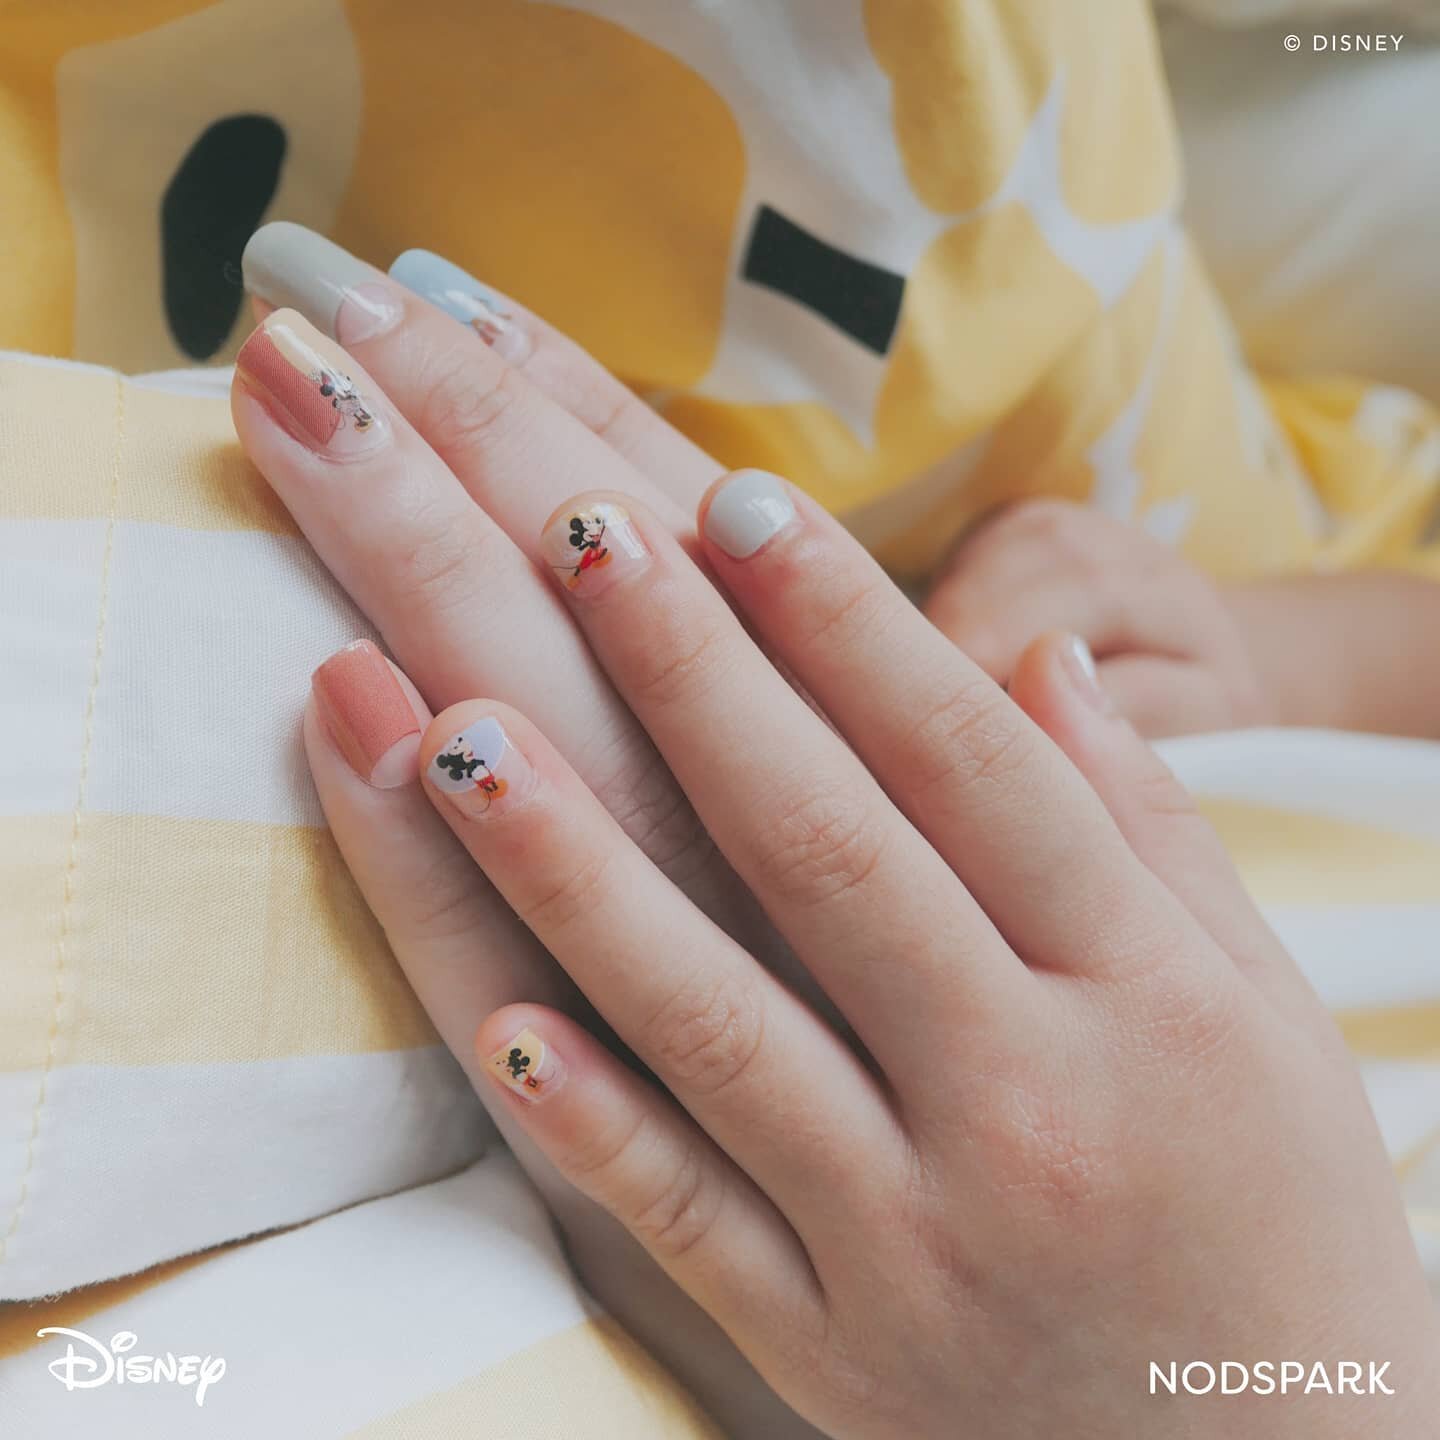 Awww, the cutest twinning with @nodspark latest collaboration with @disney for one of those memorable bonding time your princesses will remember you for! ❤️💯
Check out which princesses will be on your nails, launching tonight! @nodspark
.
.
.
#sgkid